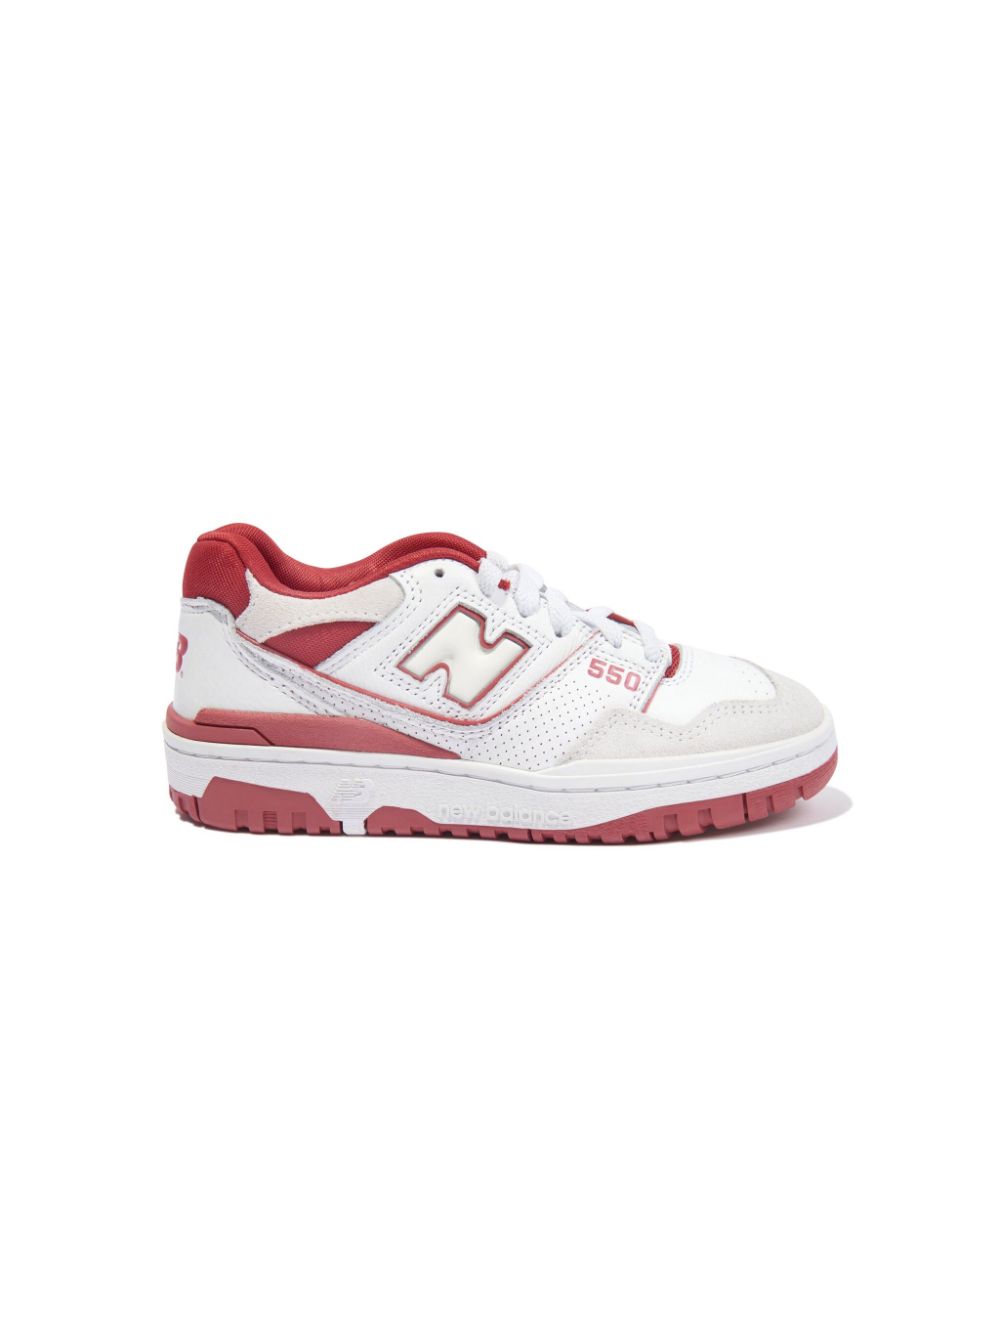 New Balance Kids 550 lace-up leather sneakers - White von New Balance Kids